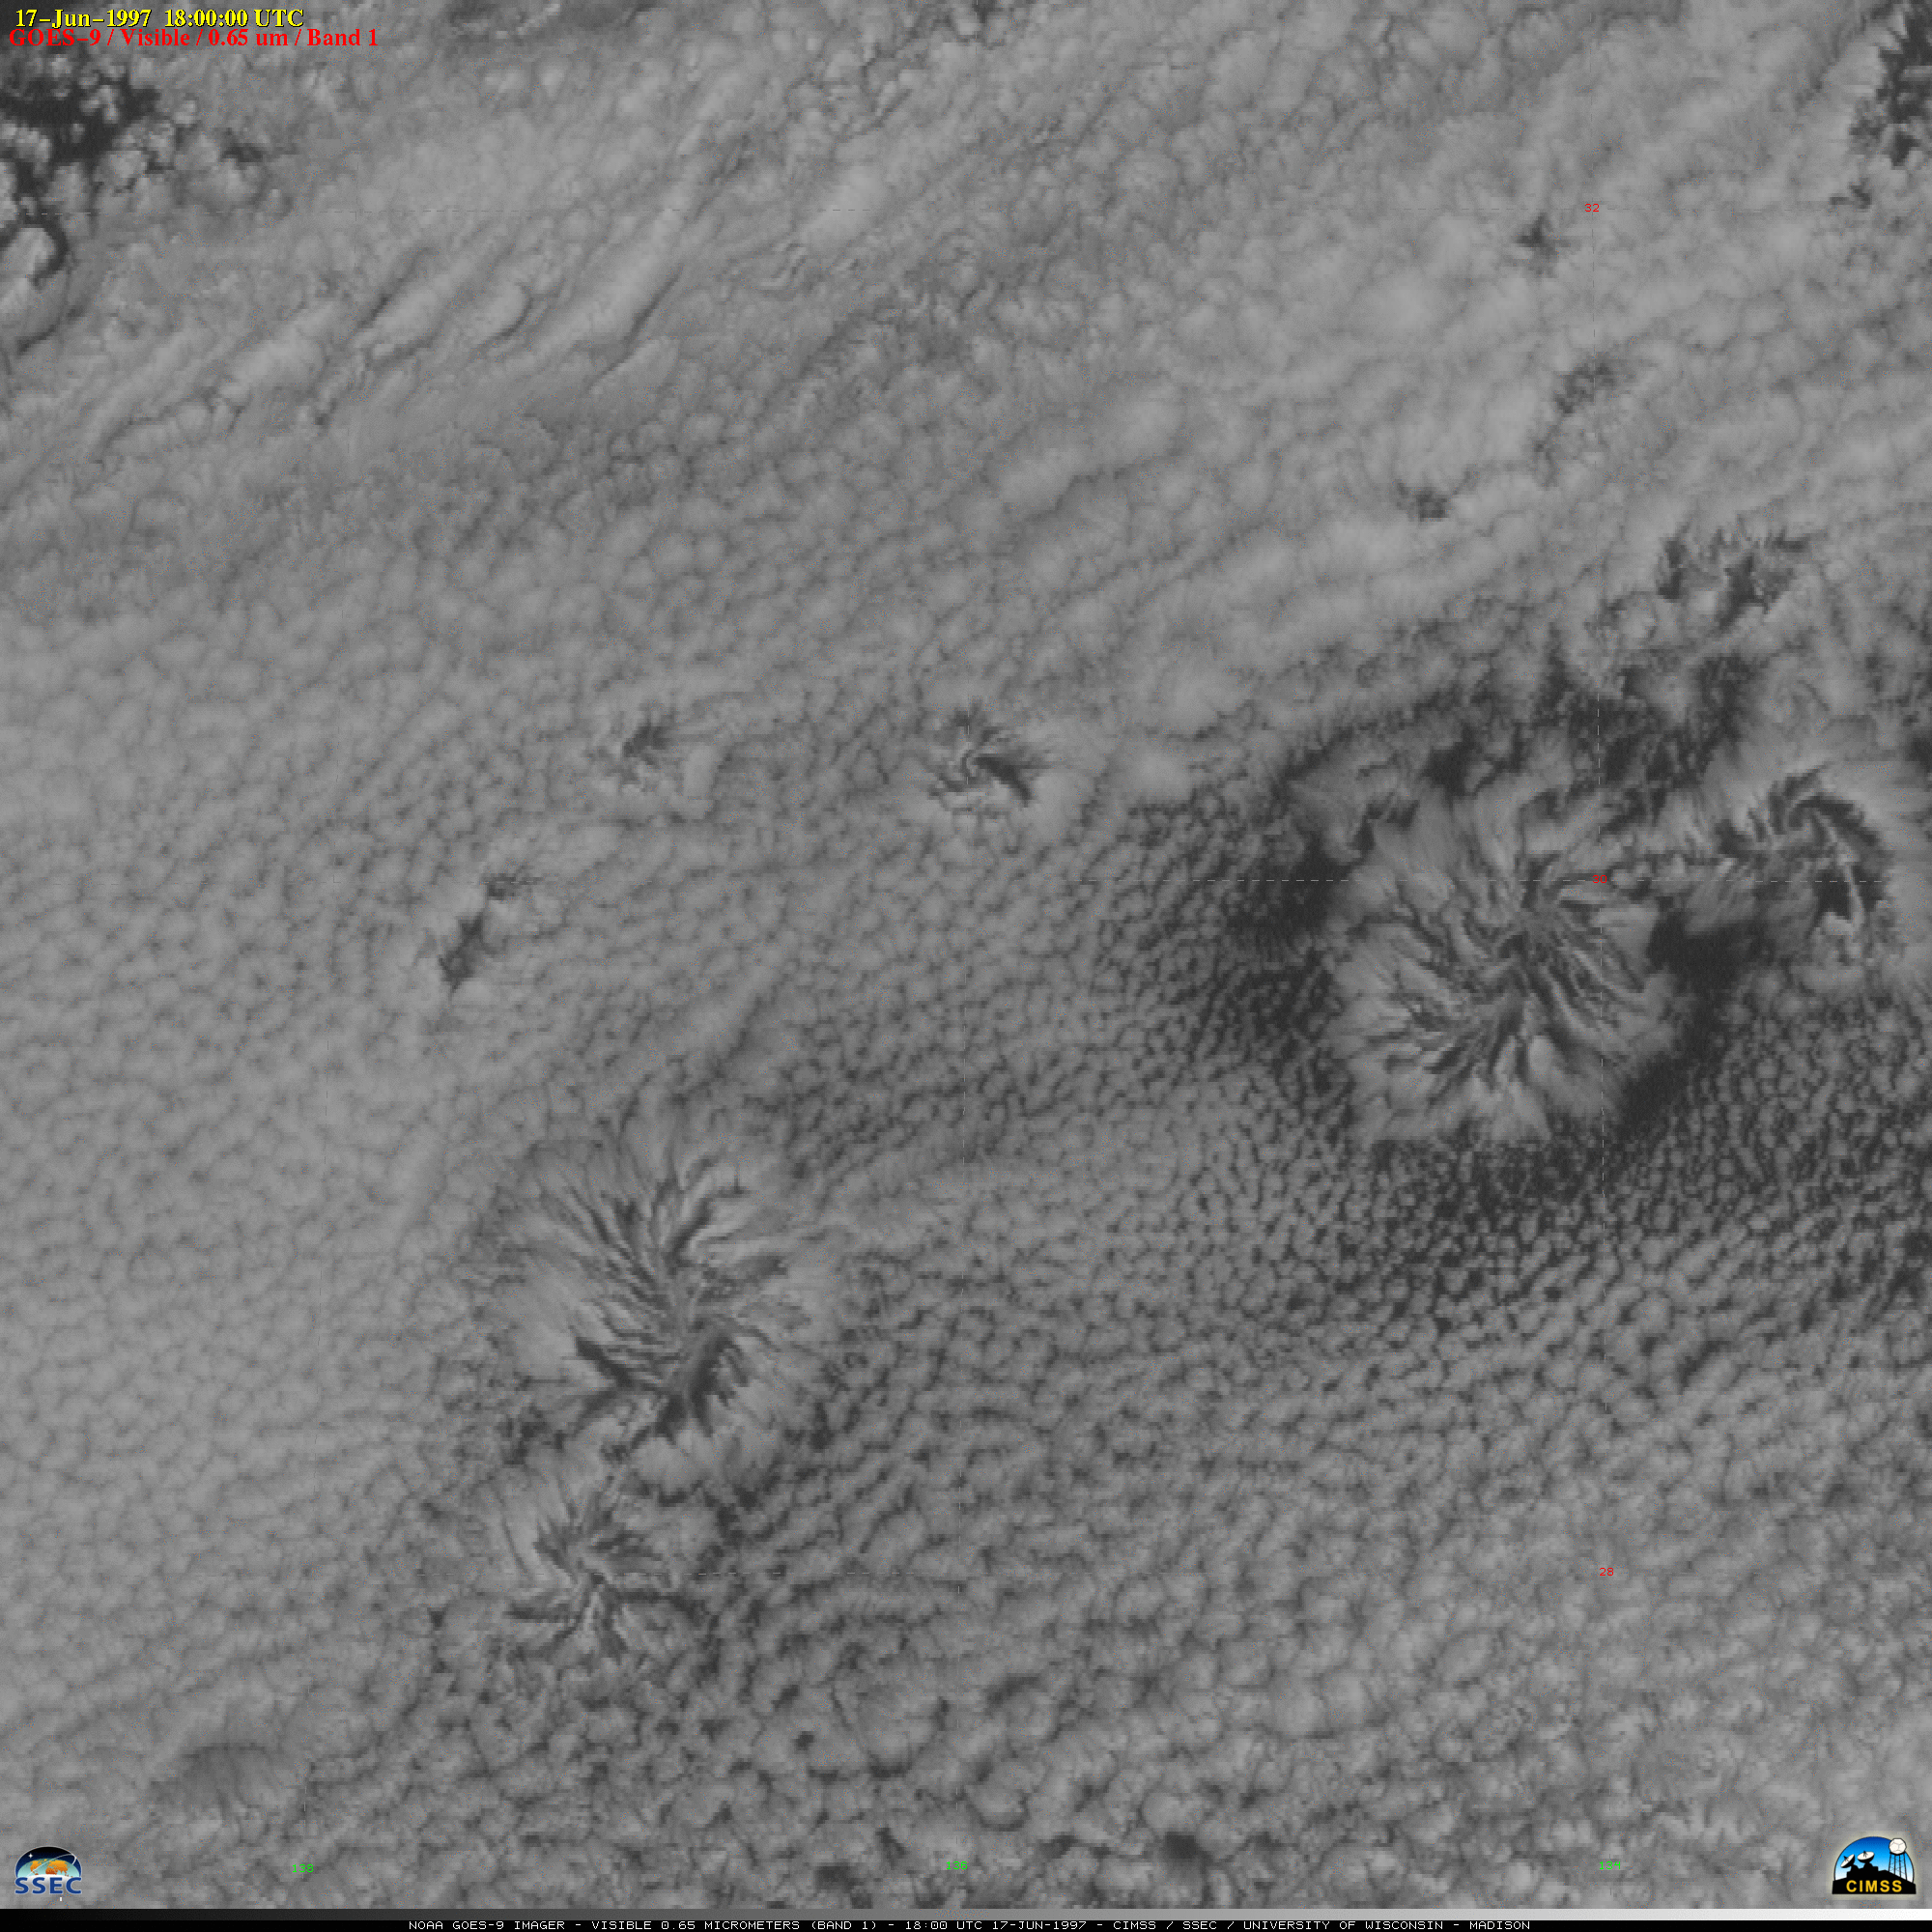 GOES-9 visible images